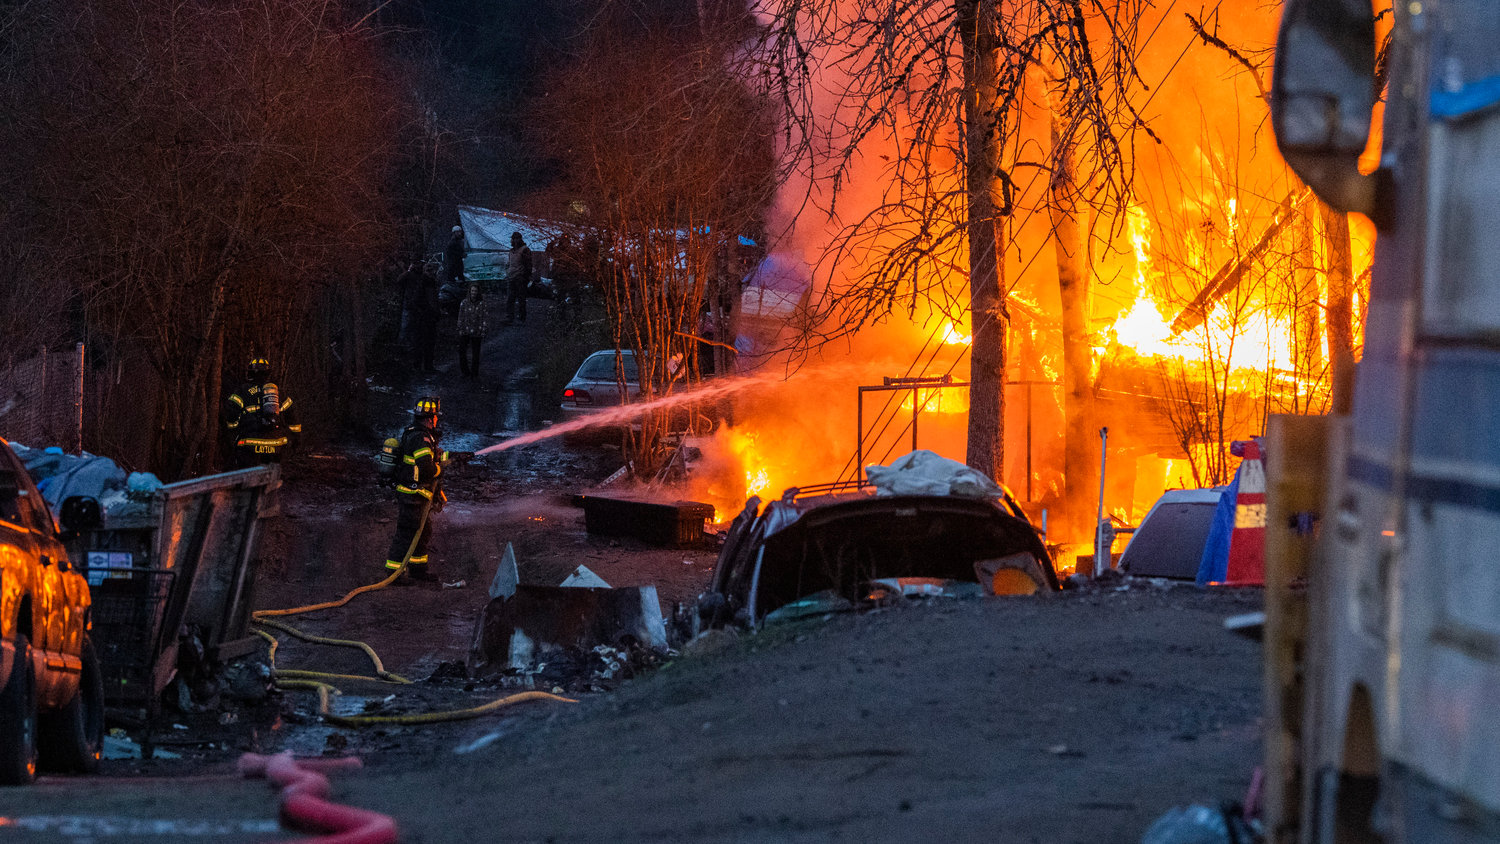 Riverside Fire Authority, Centralia police and the Chehalis Fire Department respond to a scene at the end of Eckerson Road in Centralia near Blakeslee Junction where flames and a column of smoke rose from a structure inside a homeless encampment Tuesday, March 28, 2023.